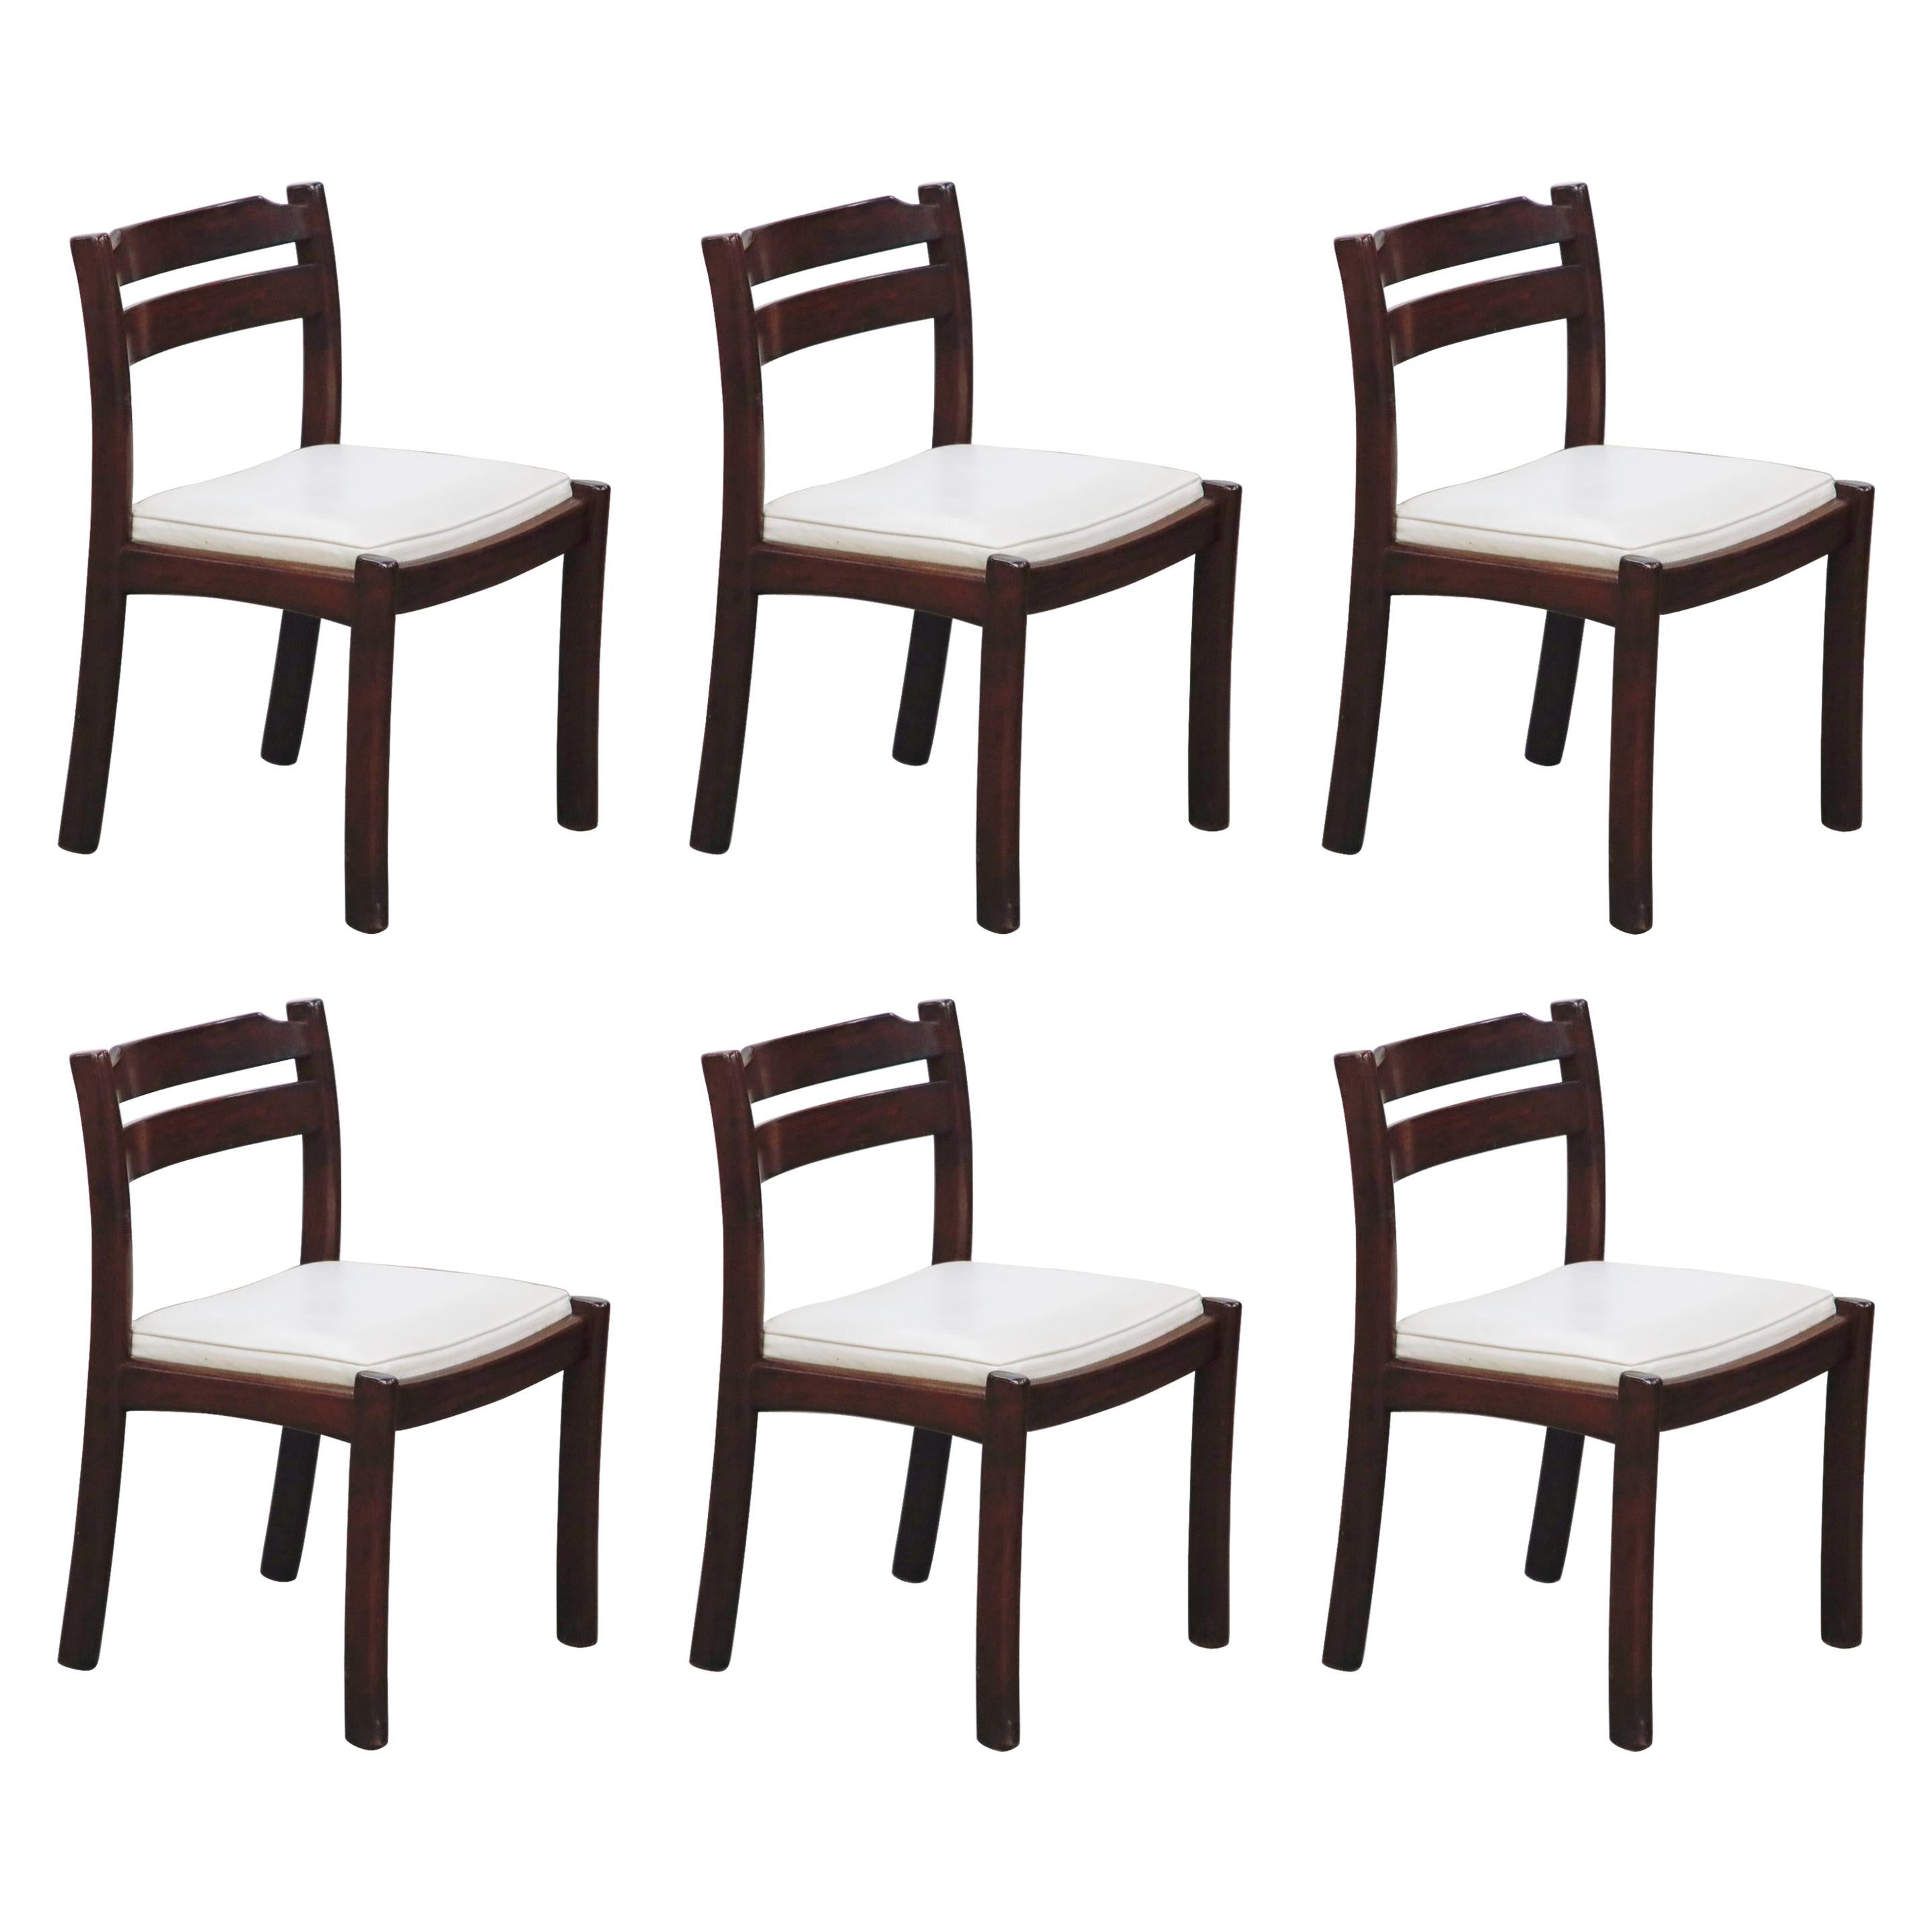 Set of Six Danish Modern Rosewood Dining Chairs by Dyrlund, circa 1960s, Signed